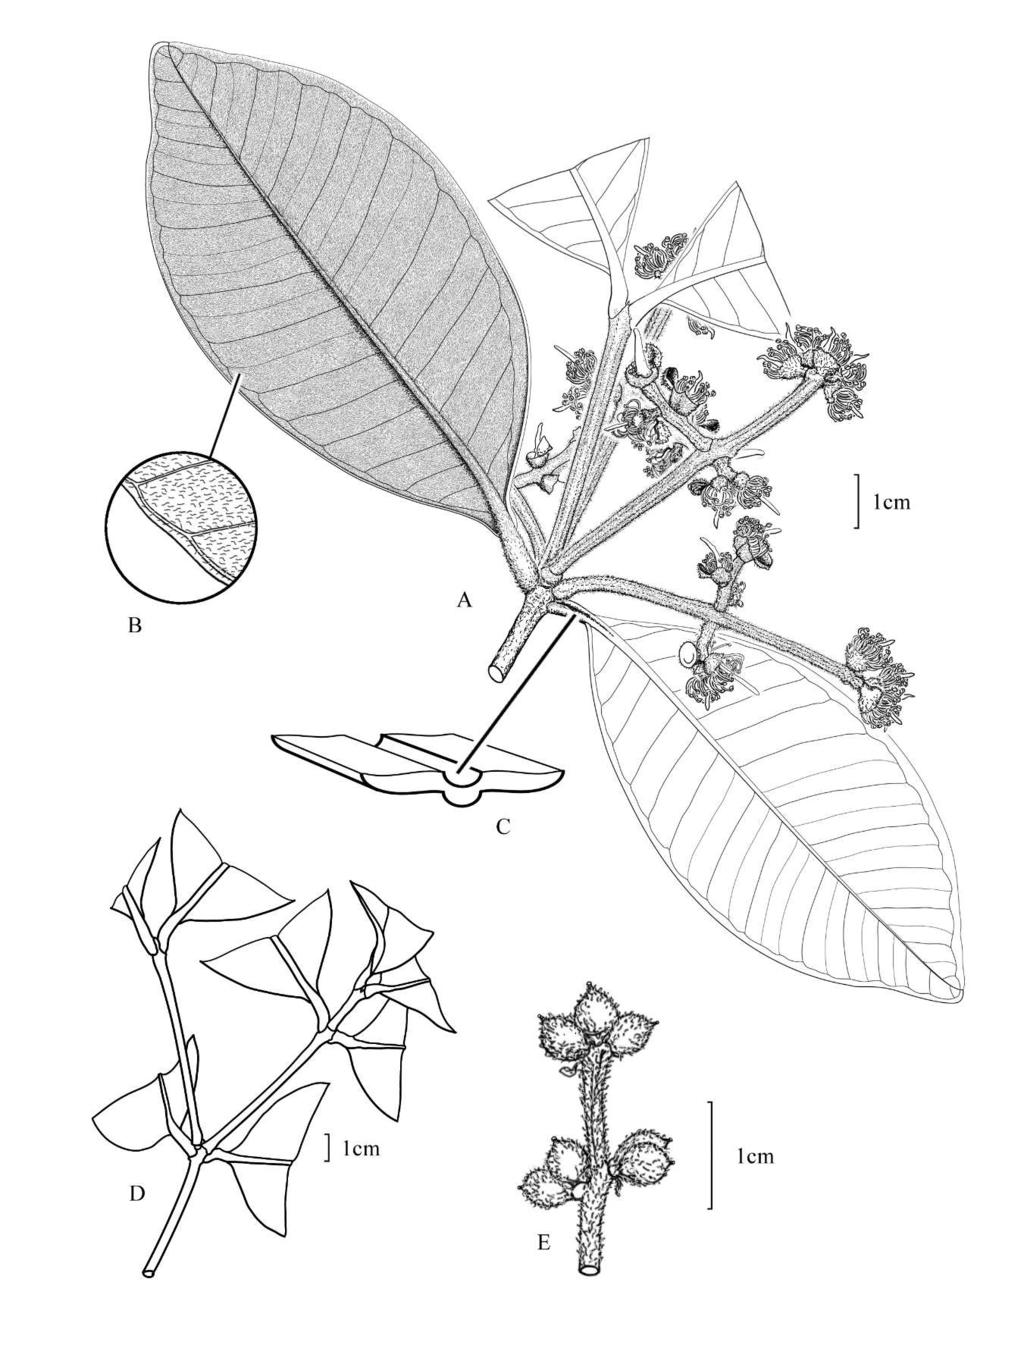 Zamora et al.: New species of Calyptranthes from Costa Rica 3 Figure 1. Calyptranthes guanacastensis. A. Twig with inflorescences. B.